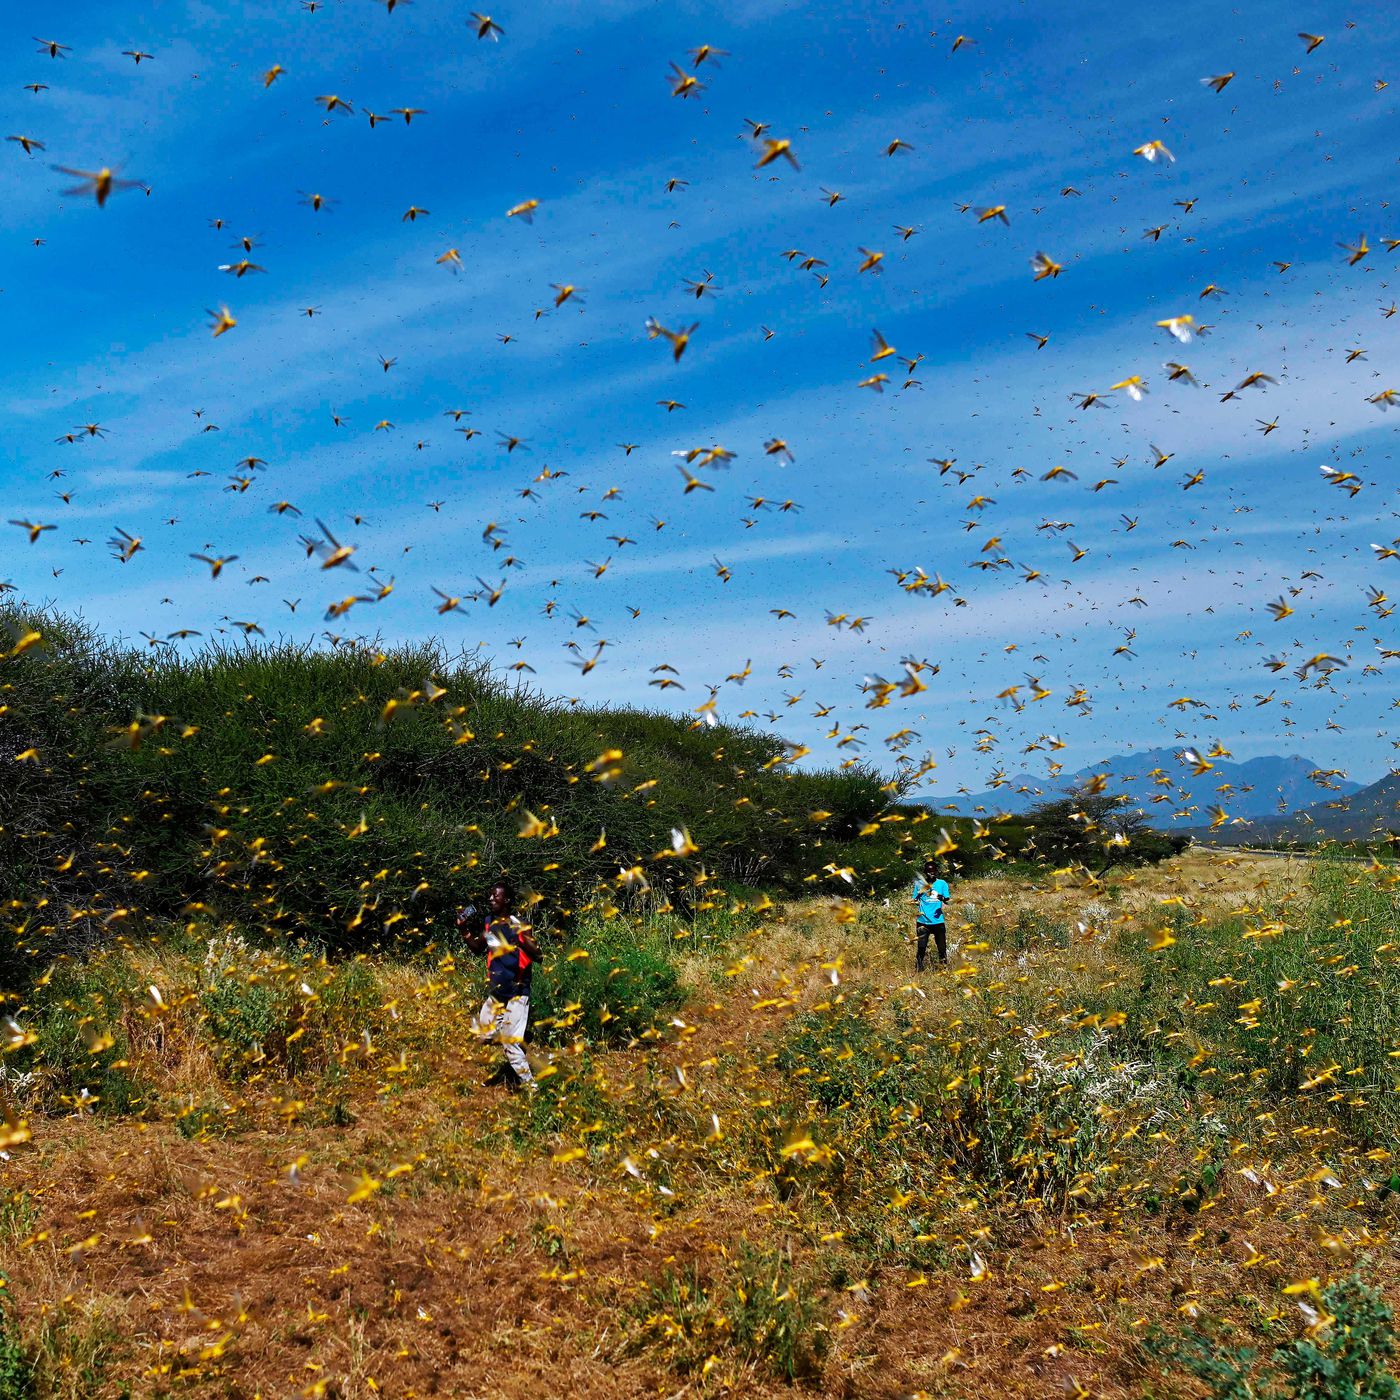 Locust plague: Africa and the Middle East see swarms devouring crops - Vox